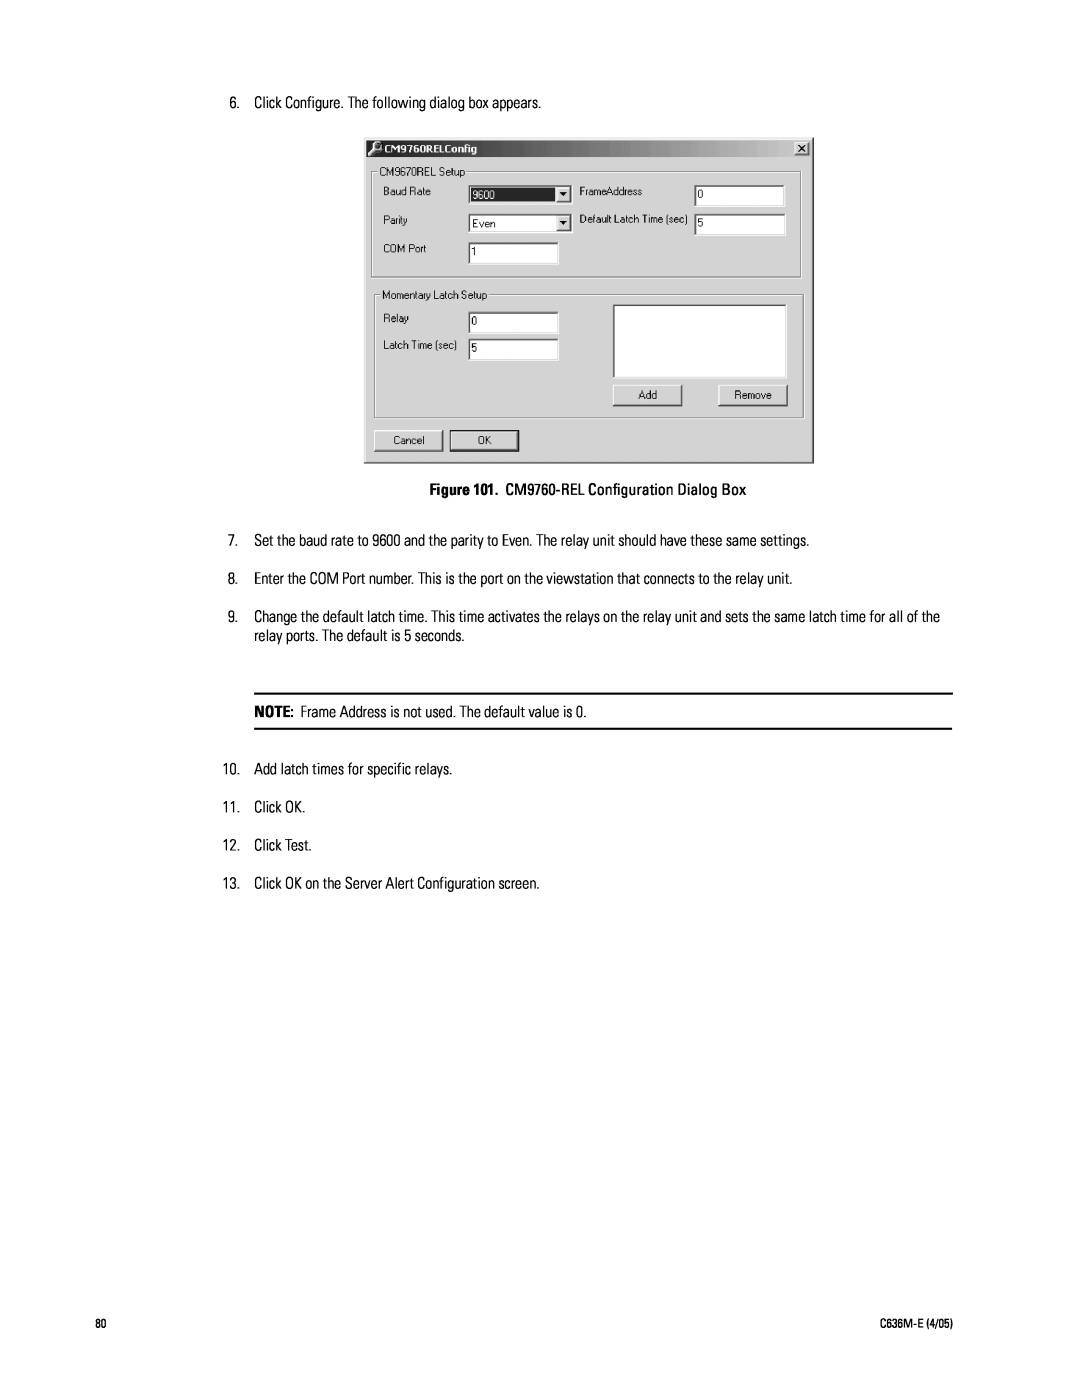 Pelco DX9100 installation manual Click Configure. The following dialog box appears 